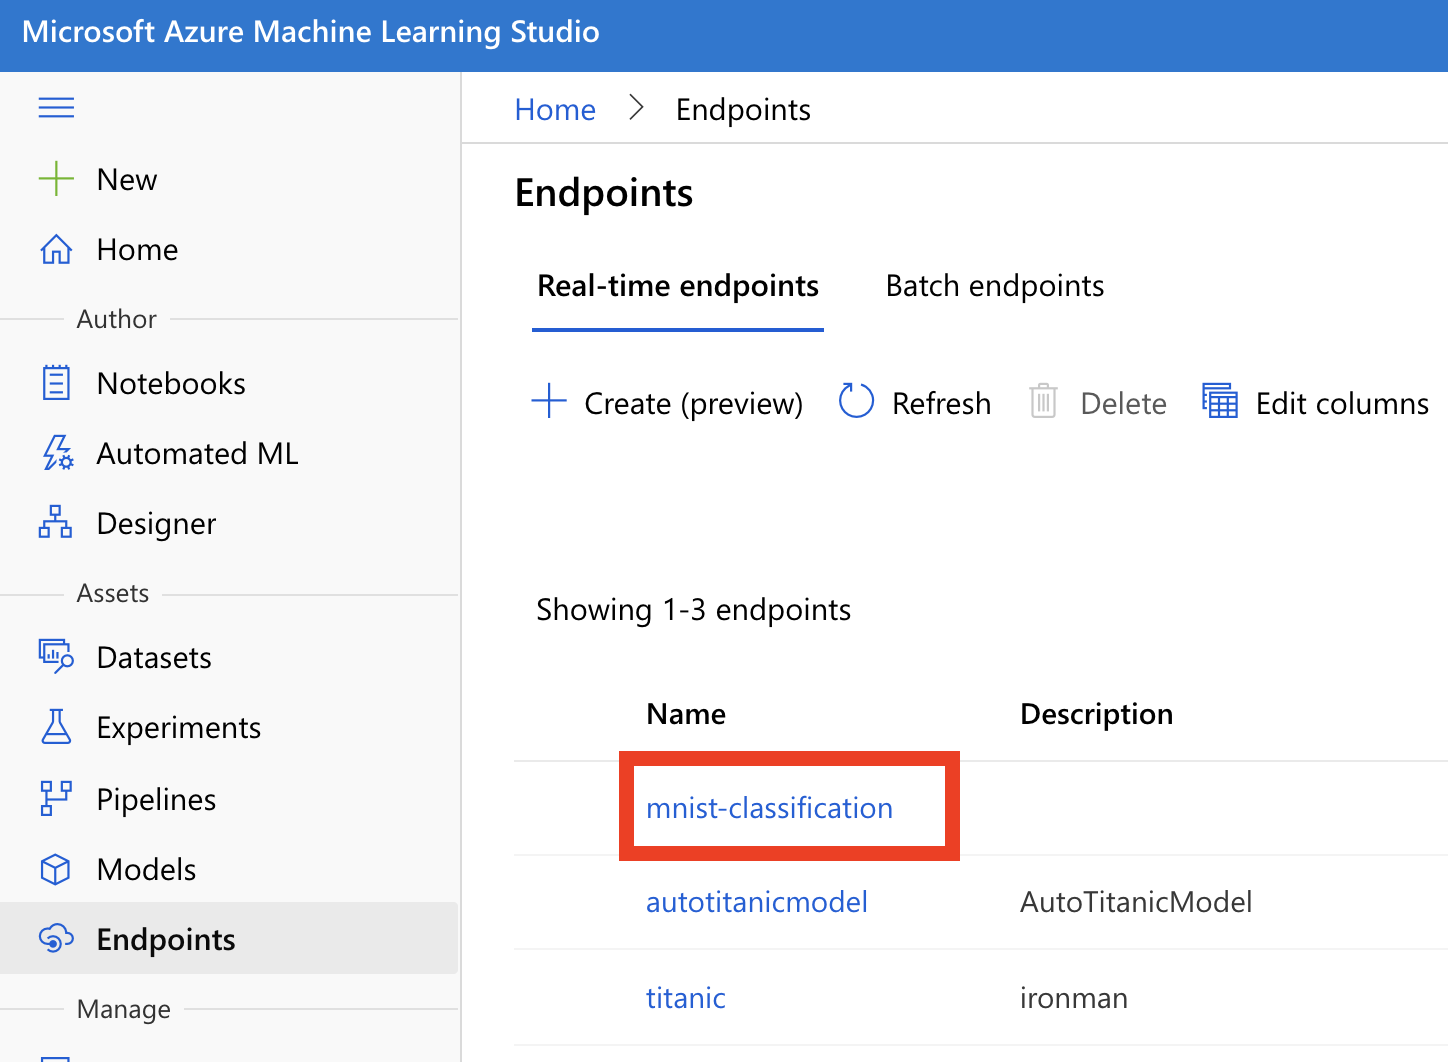 Register and deploy model in Azure machine learning